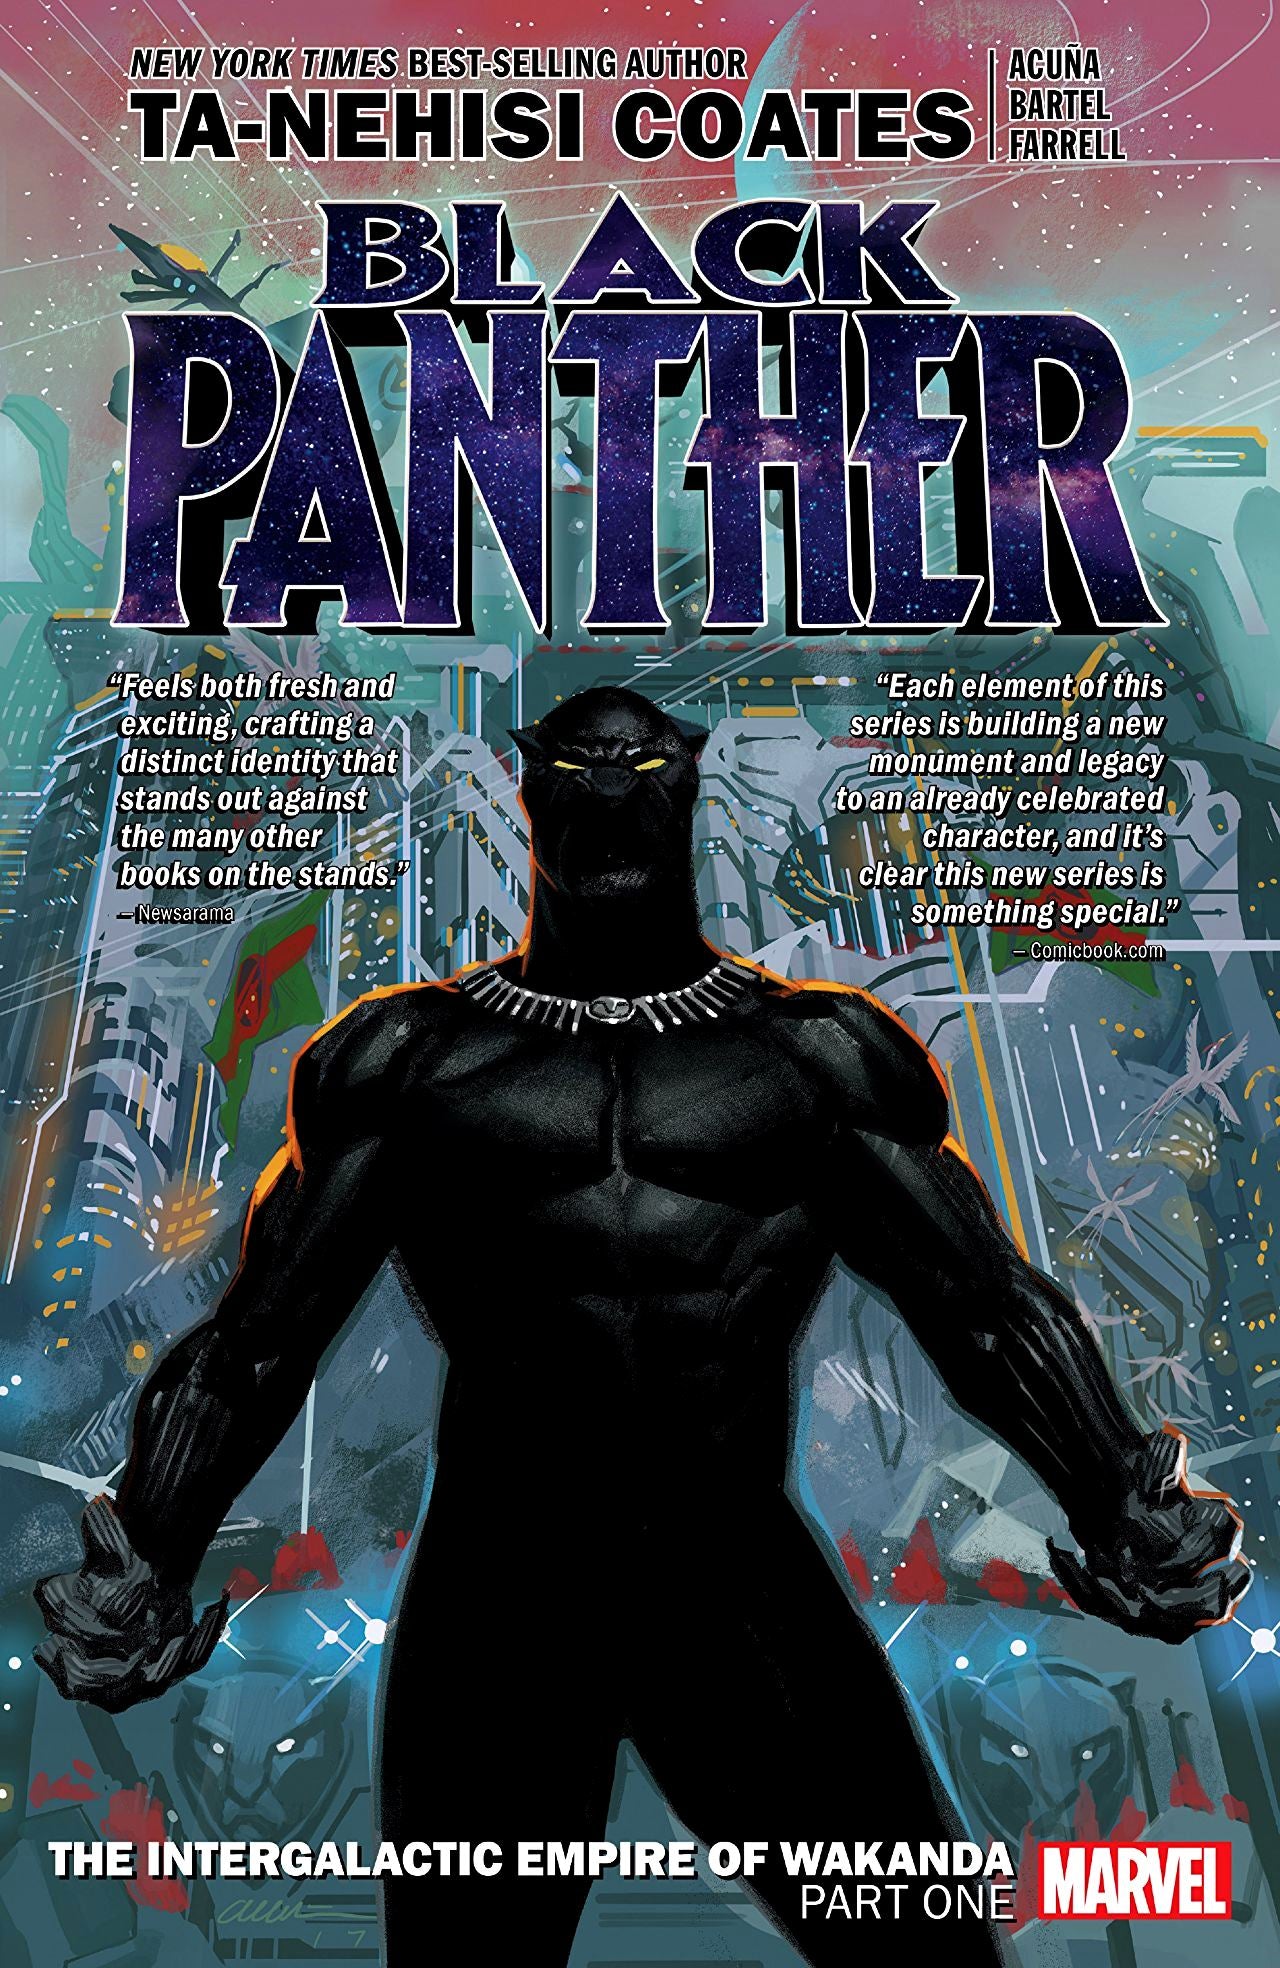 Black Panther (2016) Book 6: The Intergalactic Empire of Wakanda - Part One